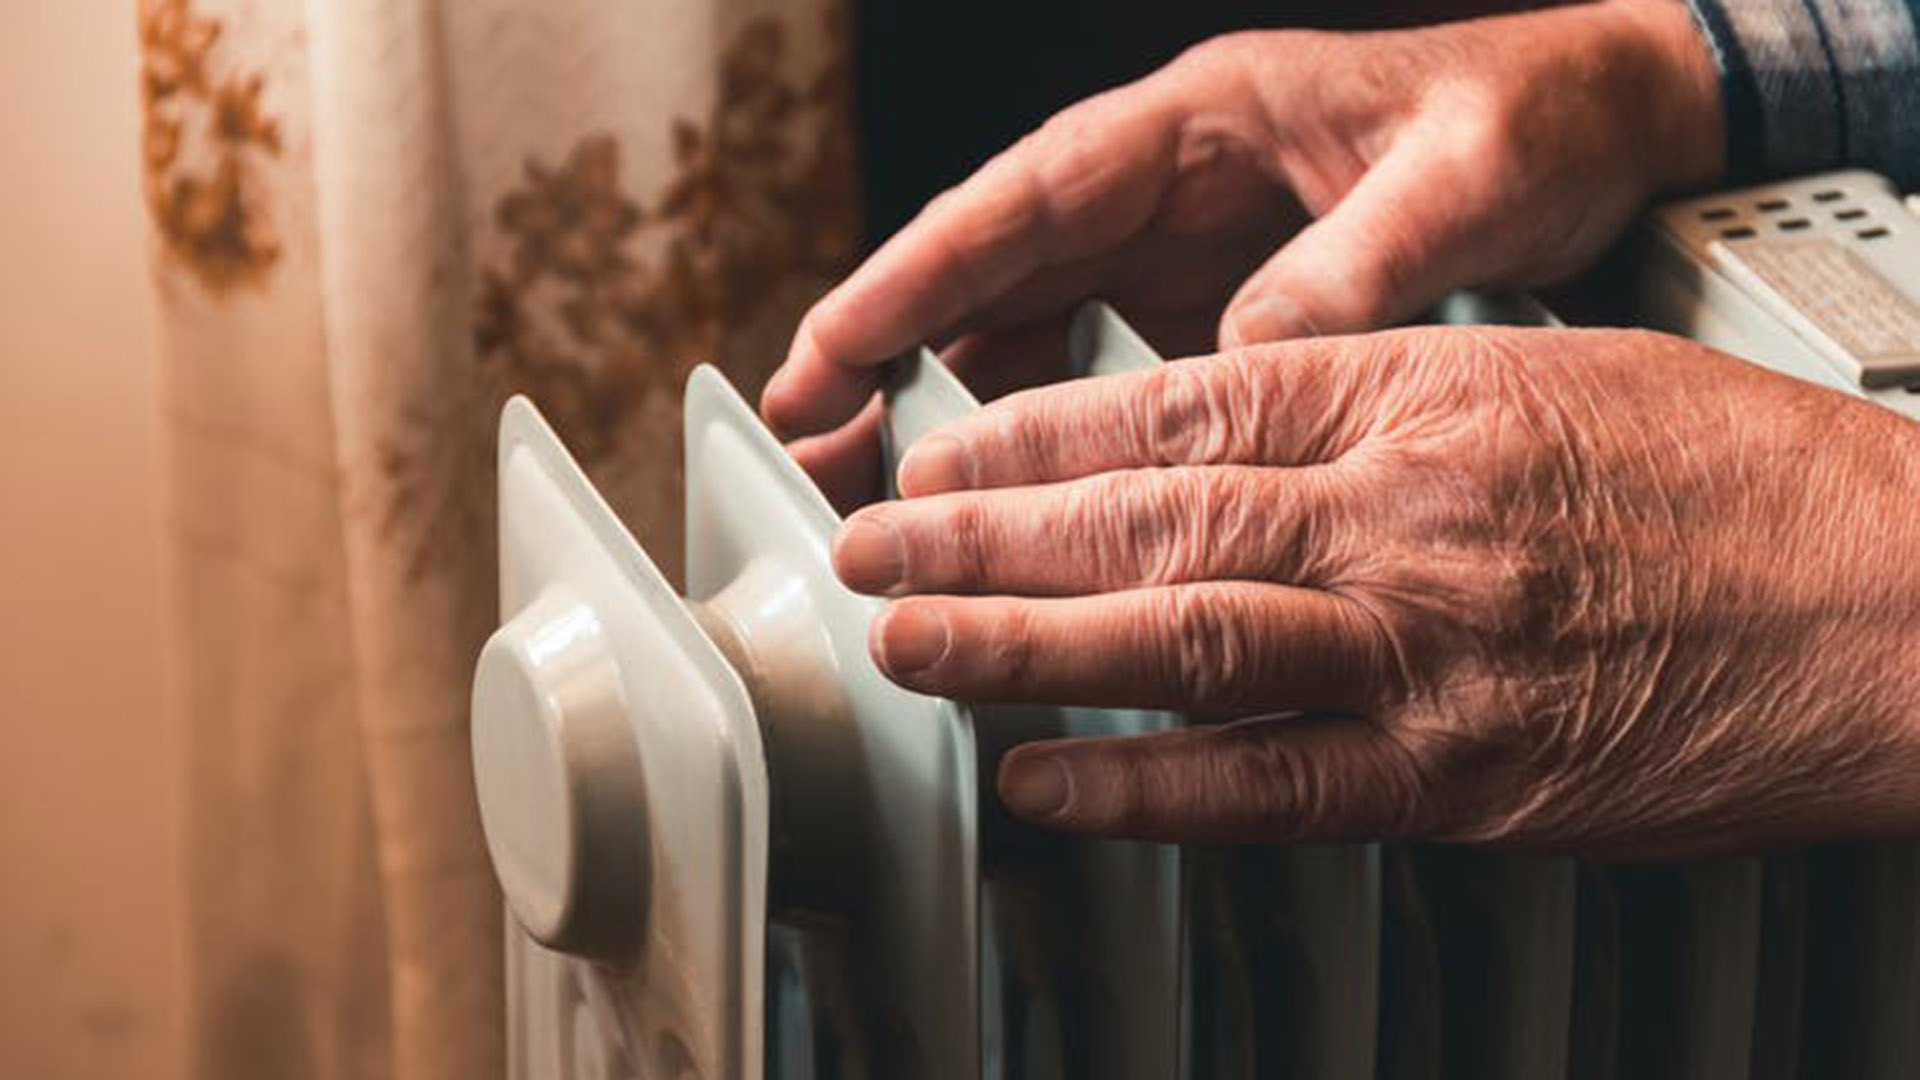 Generic image of person warming hands near heater. Shutterstock image